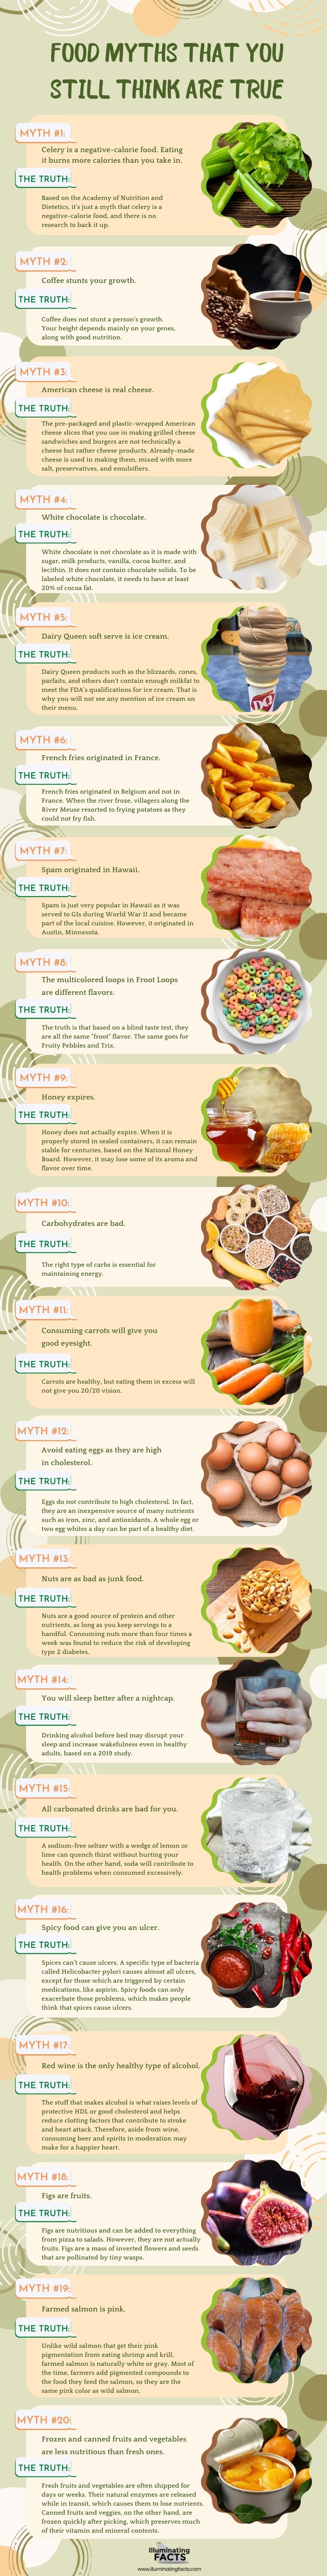 Food Myths that You Still Think are True